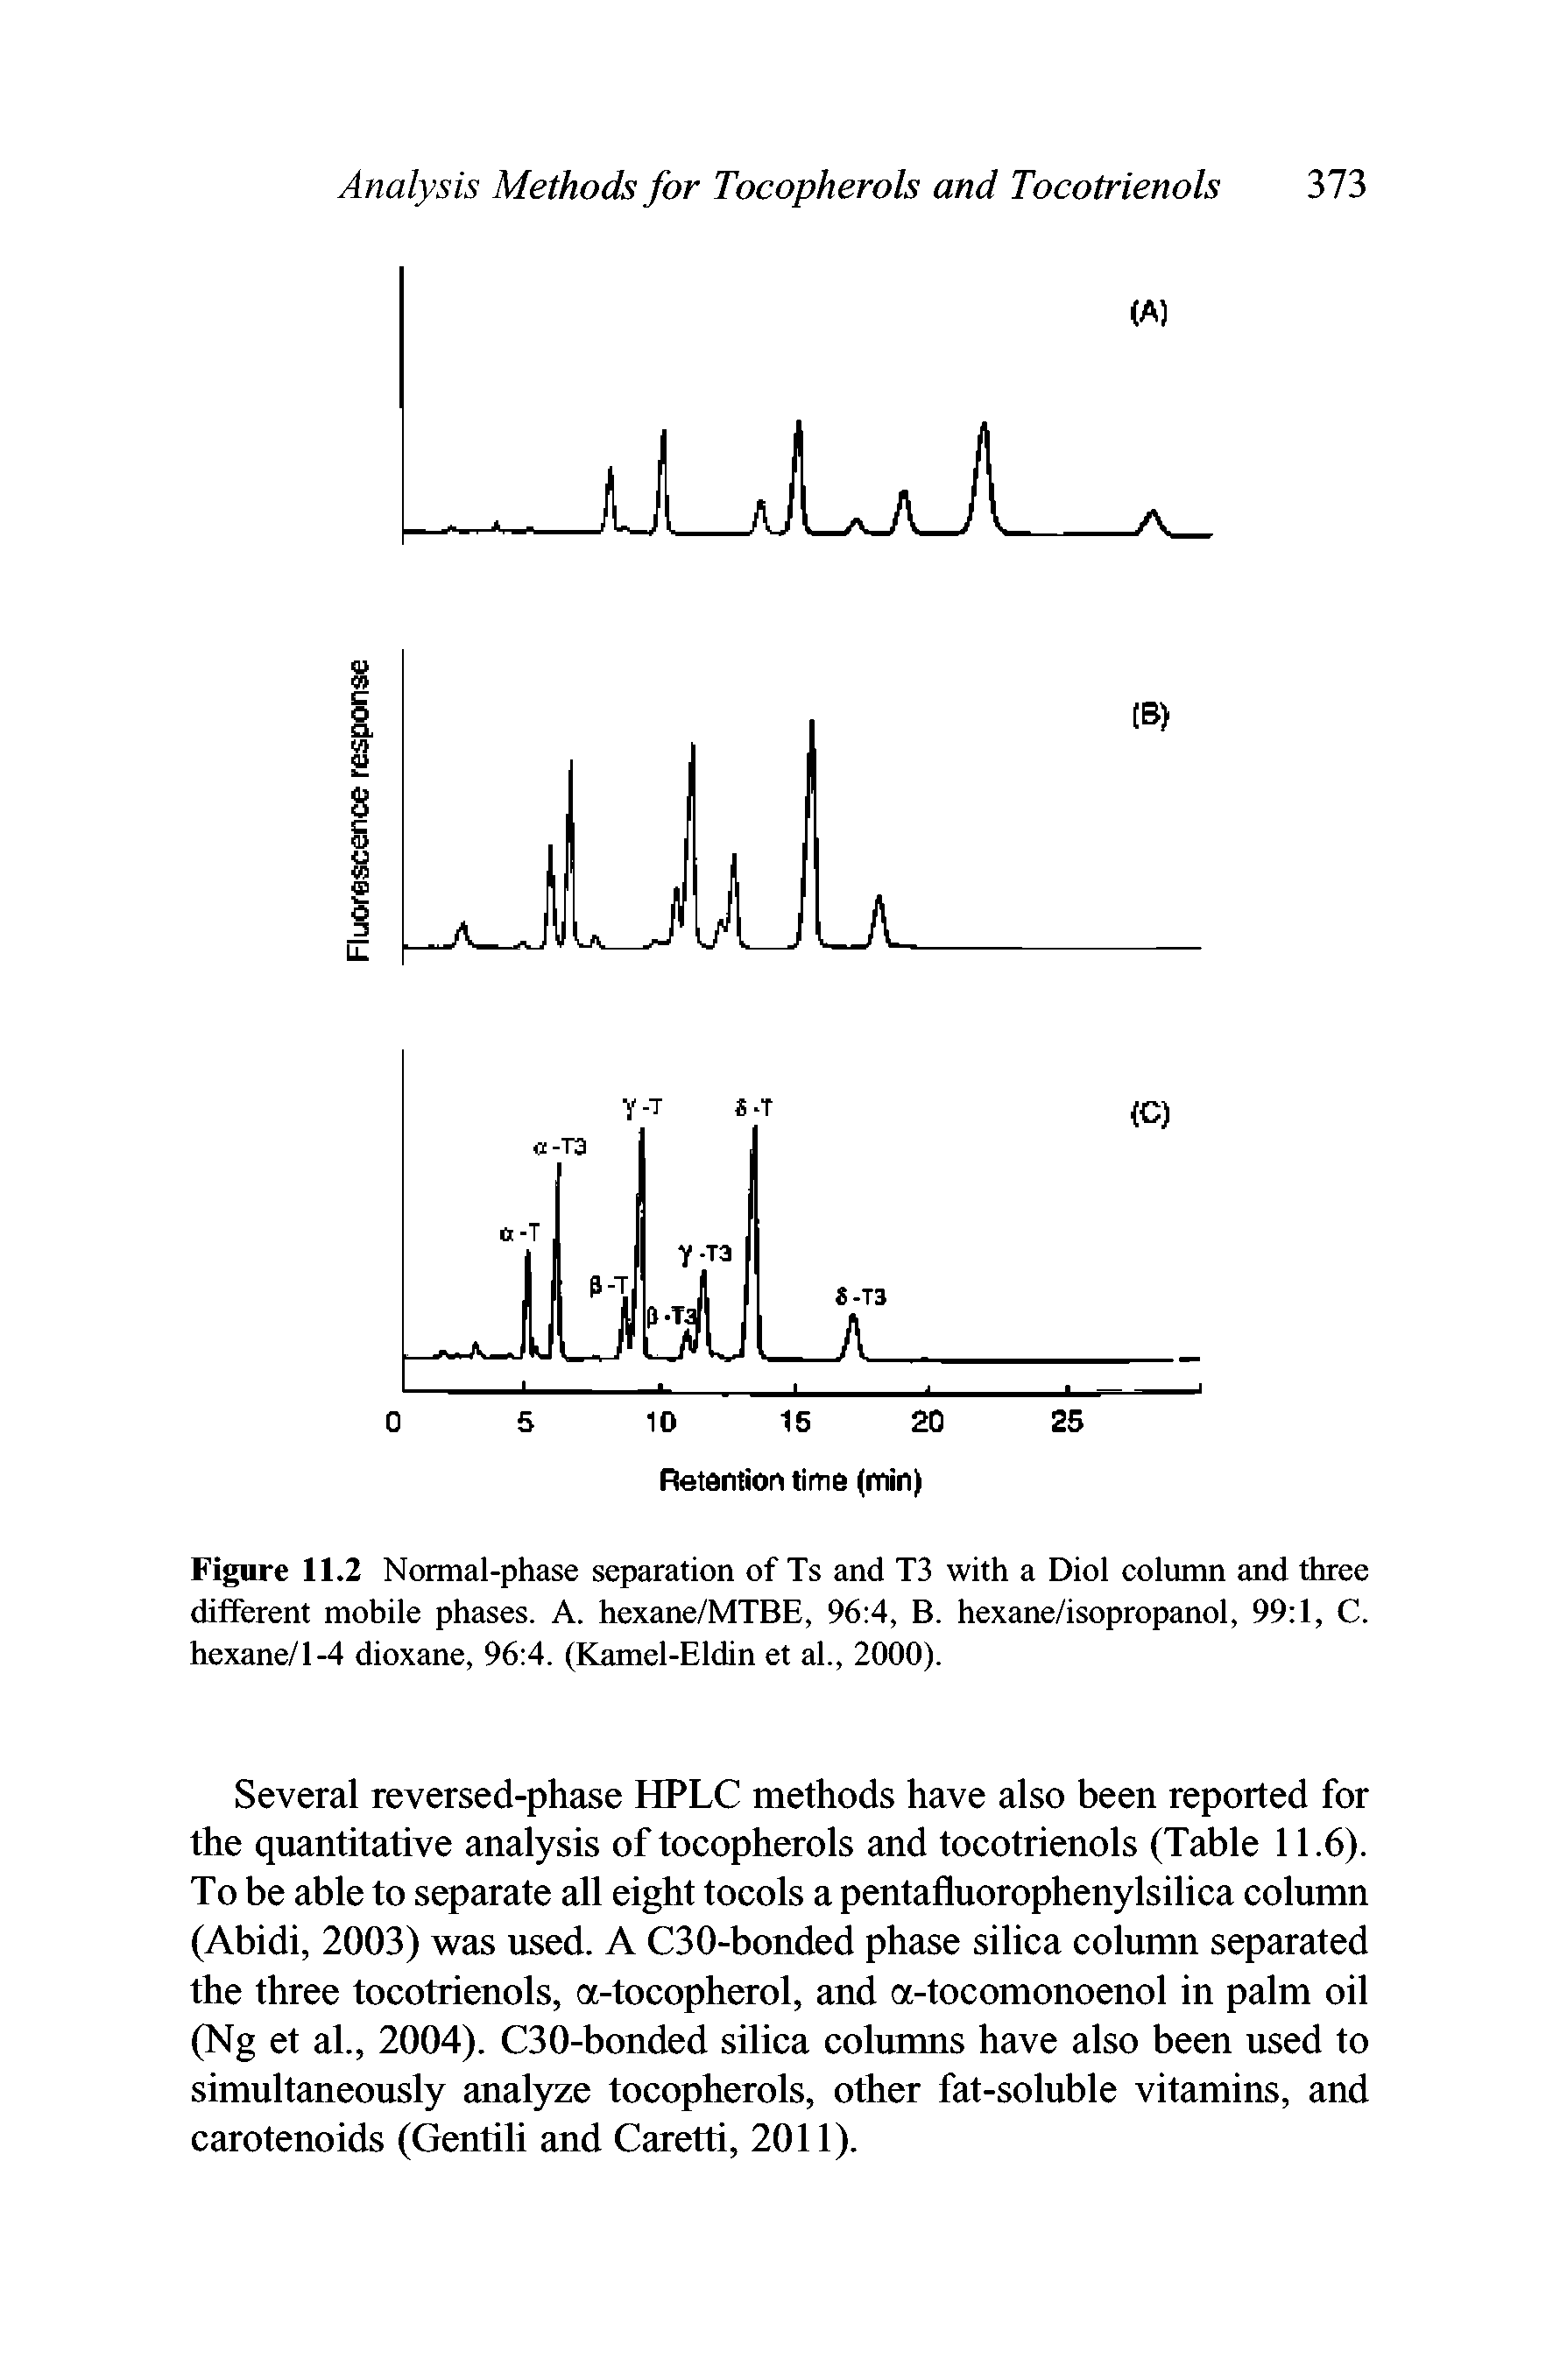 Figure 11.2 Normal-phase separation of Ts and T3 with a Diol column and three different mobile phases. A. hexane/MTBE, 96 4, B. hexane/isopropanol, 99 1, C. hexane/1-4 dioxane, 96 4. (Kamel-Eldin et al., 2000).